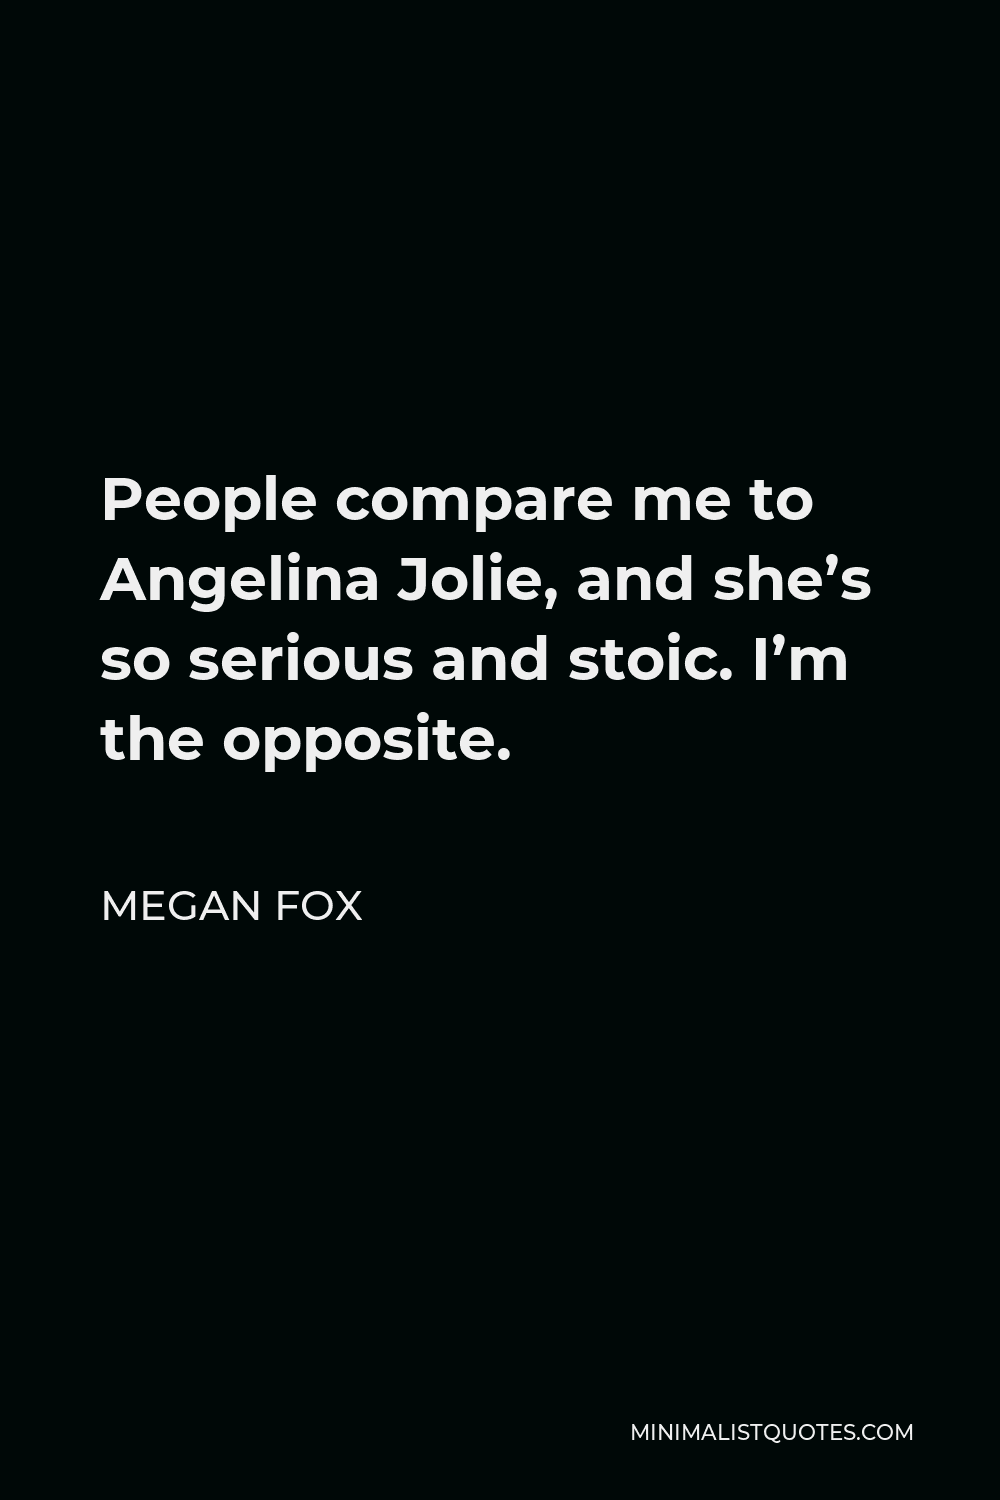 Megan Fox Quote - People compare me to Angelina Jolie, and she’s so serious and stoic. I’m the opposite.